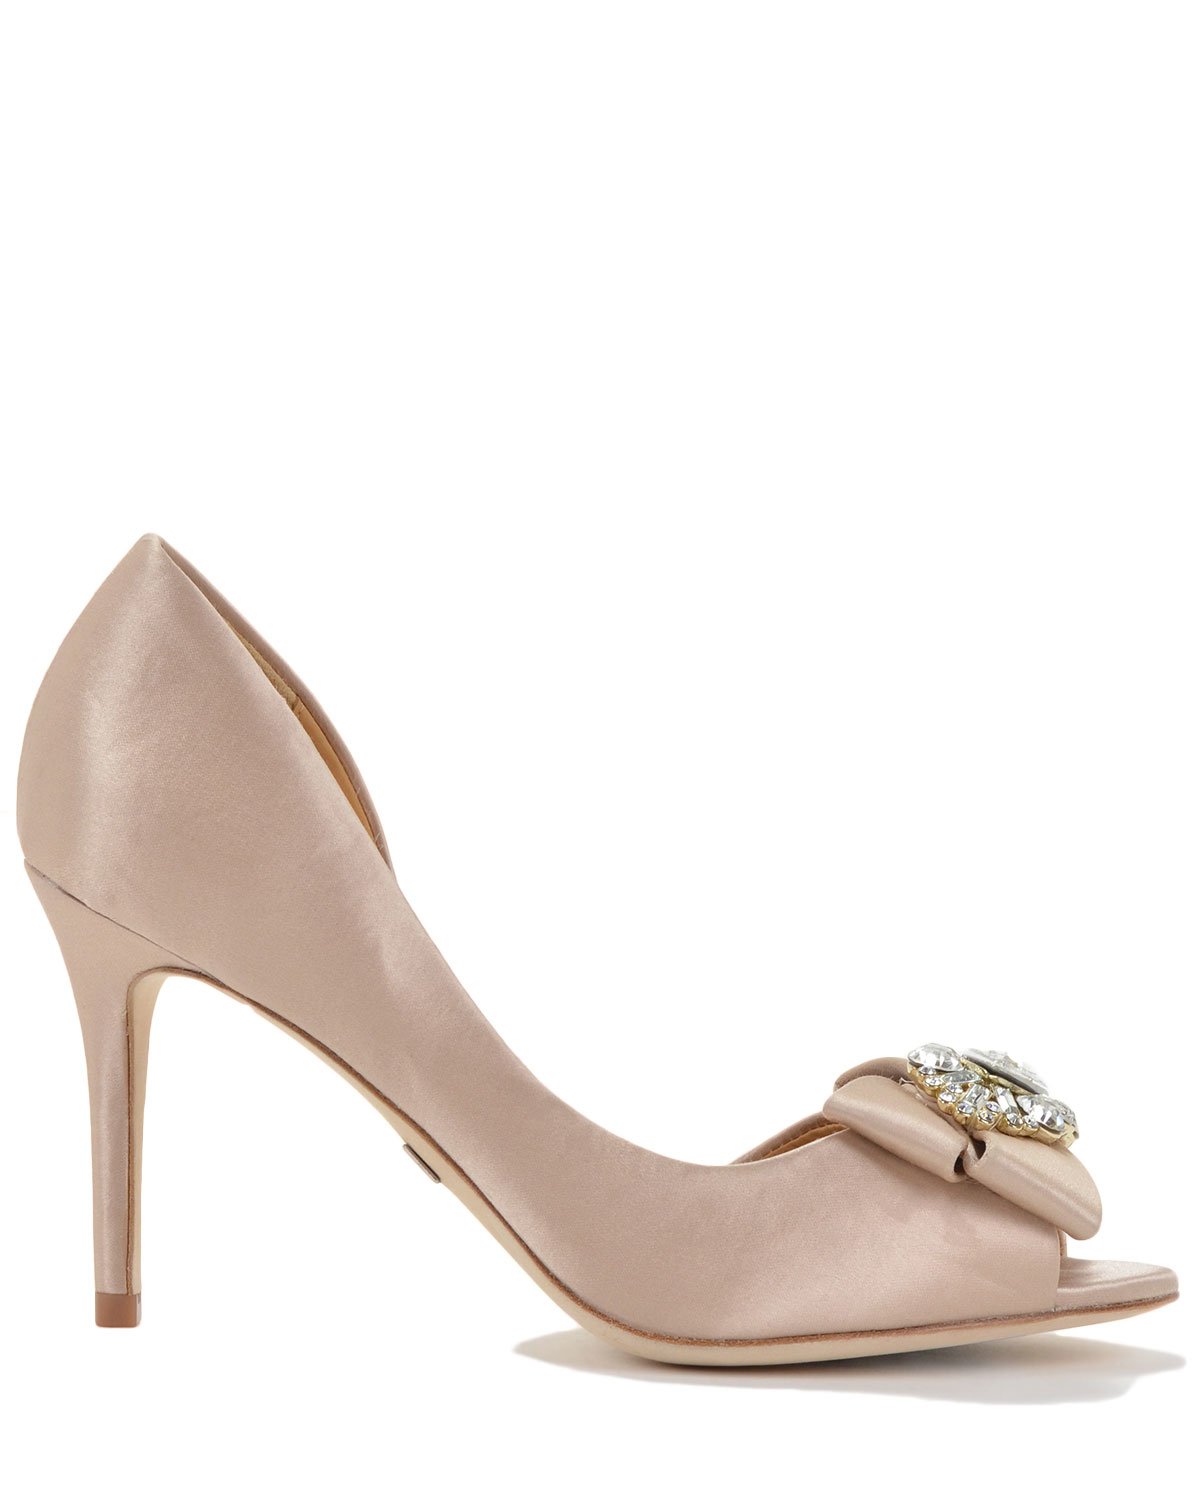 Badgley mischka Reality Satin Embelished Evening Shoe in Pink | Lyst